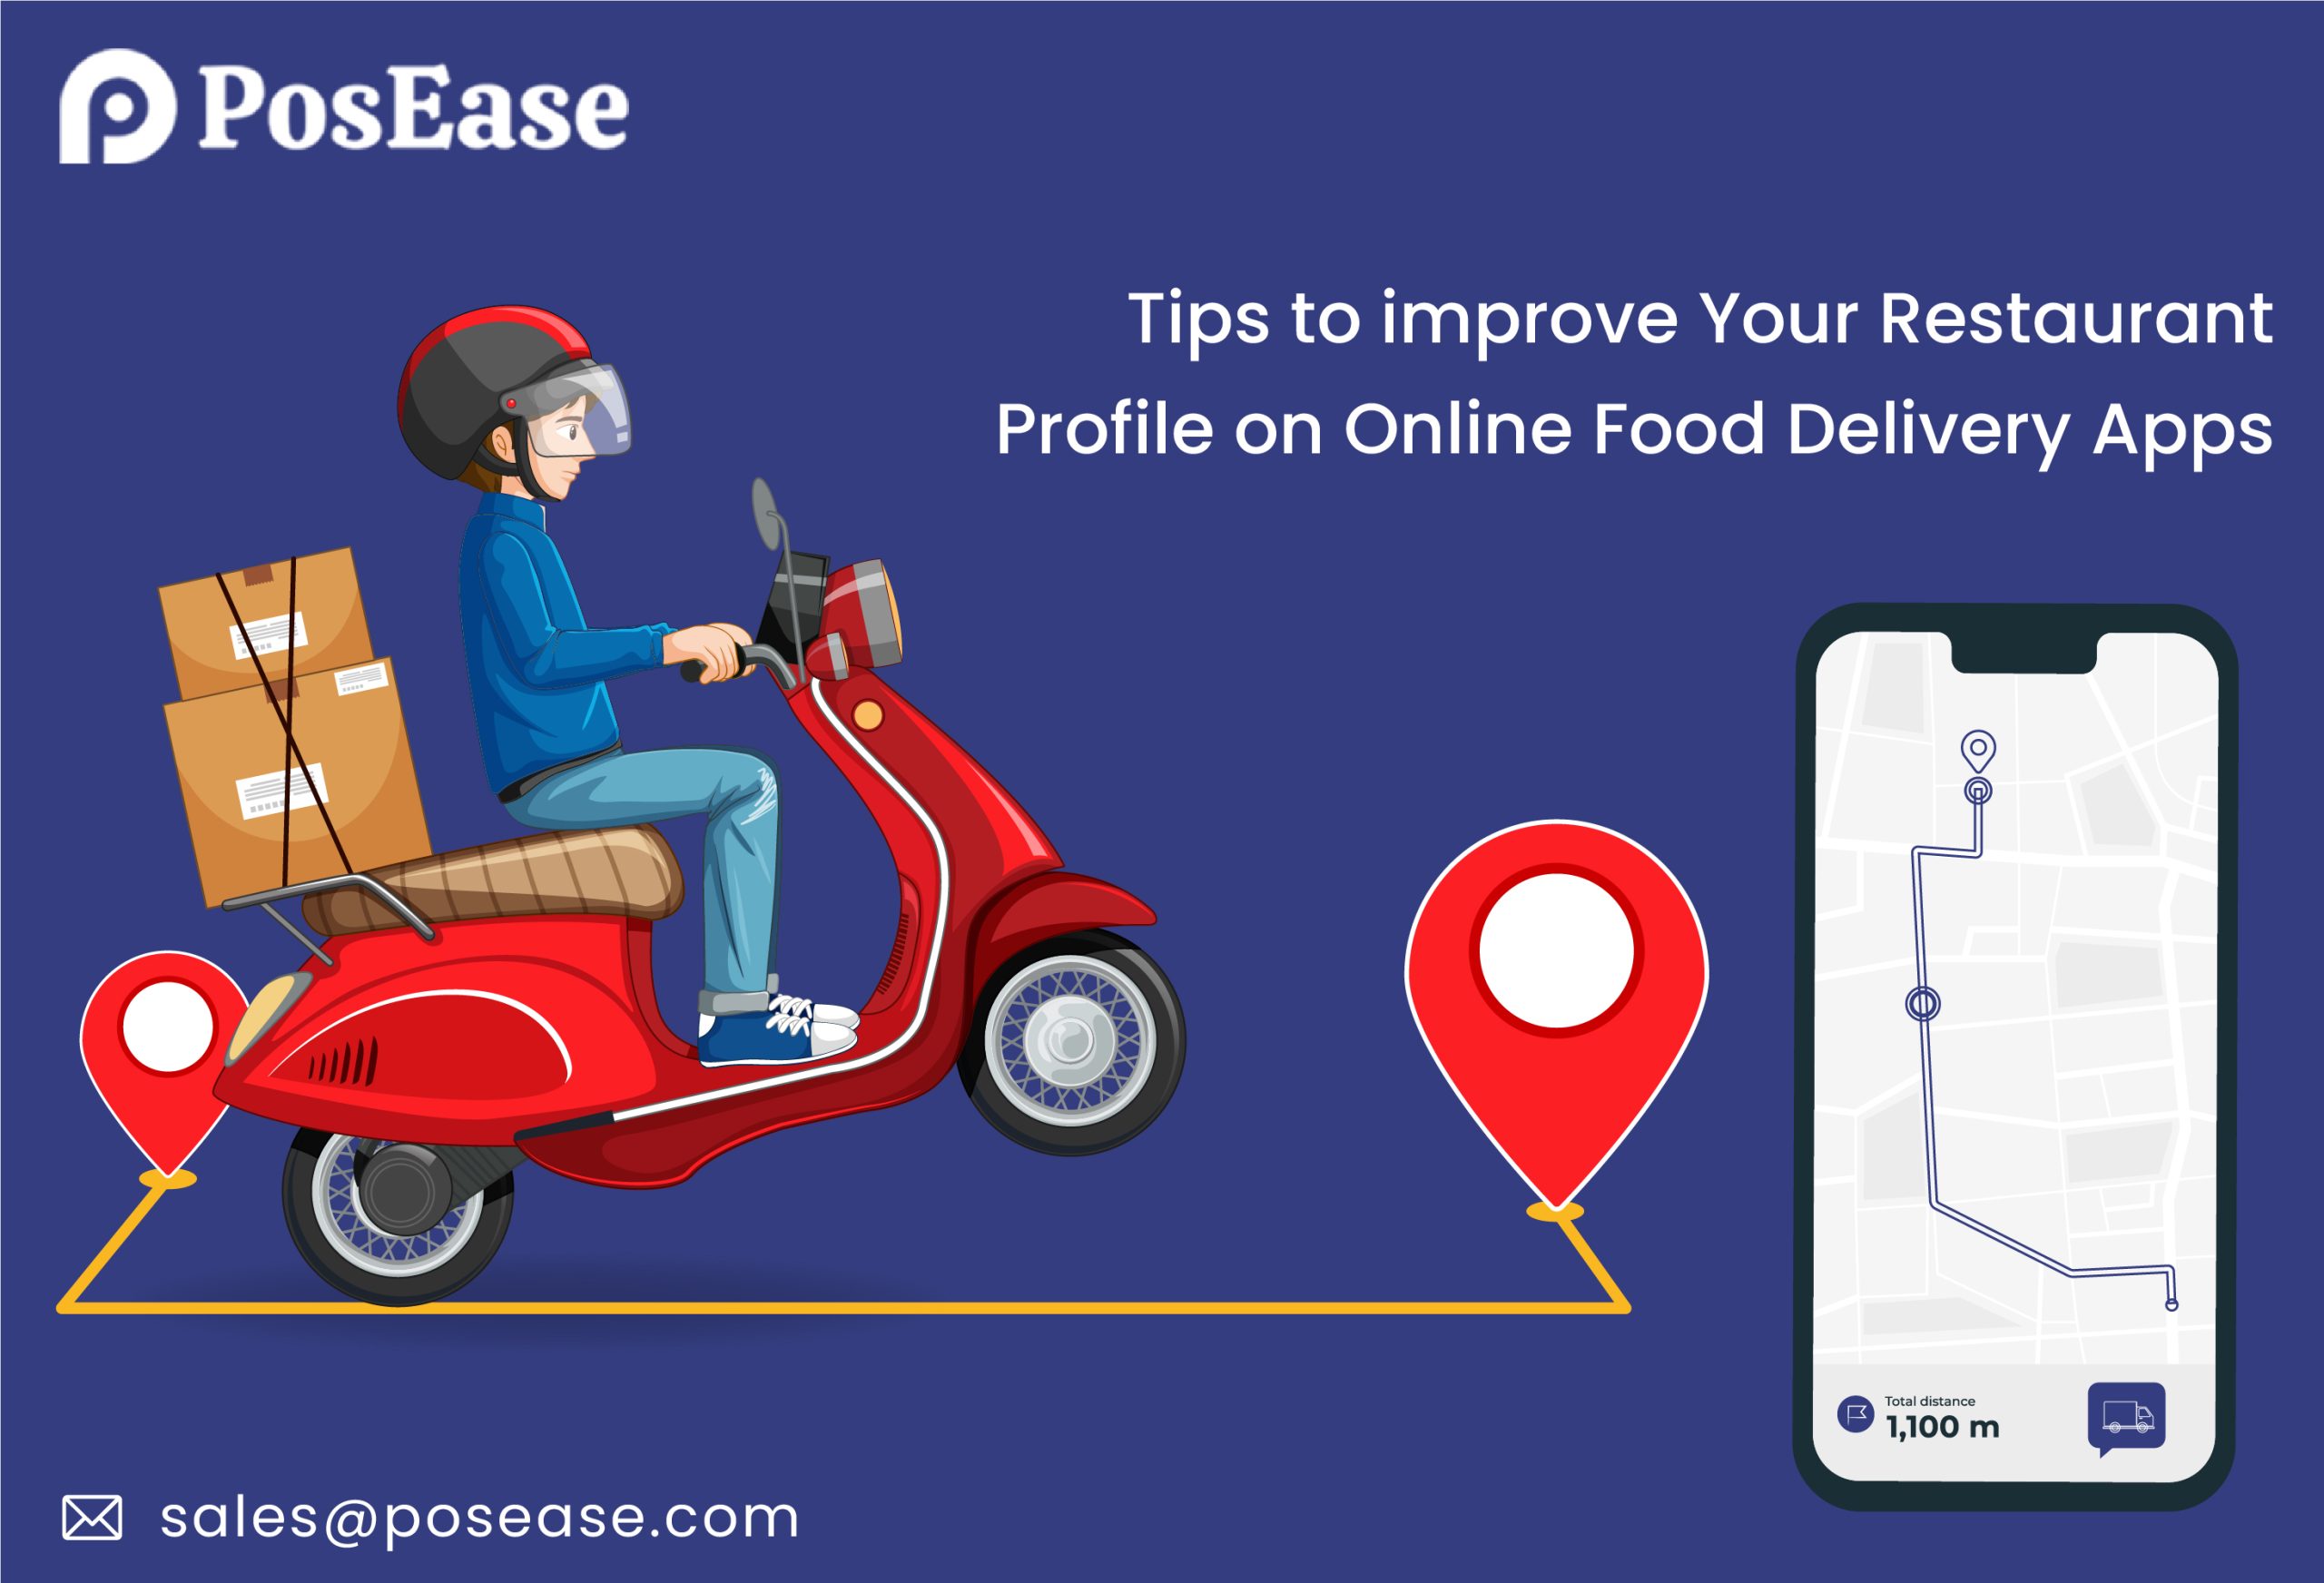 Tips to improve your restaurant profile on online food delivery apps